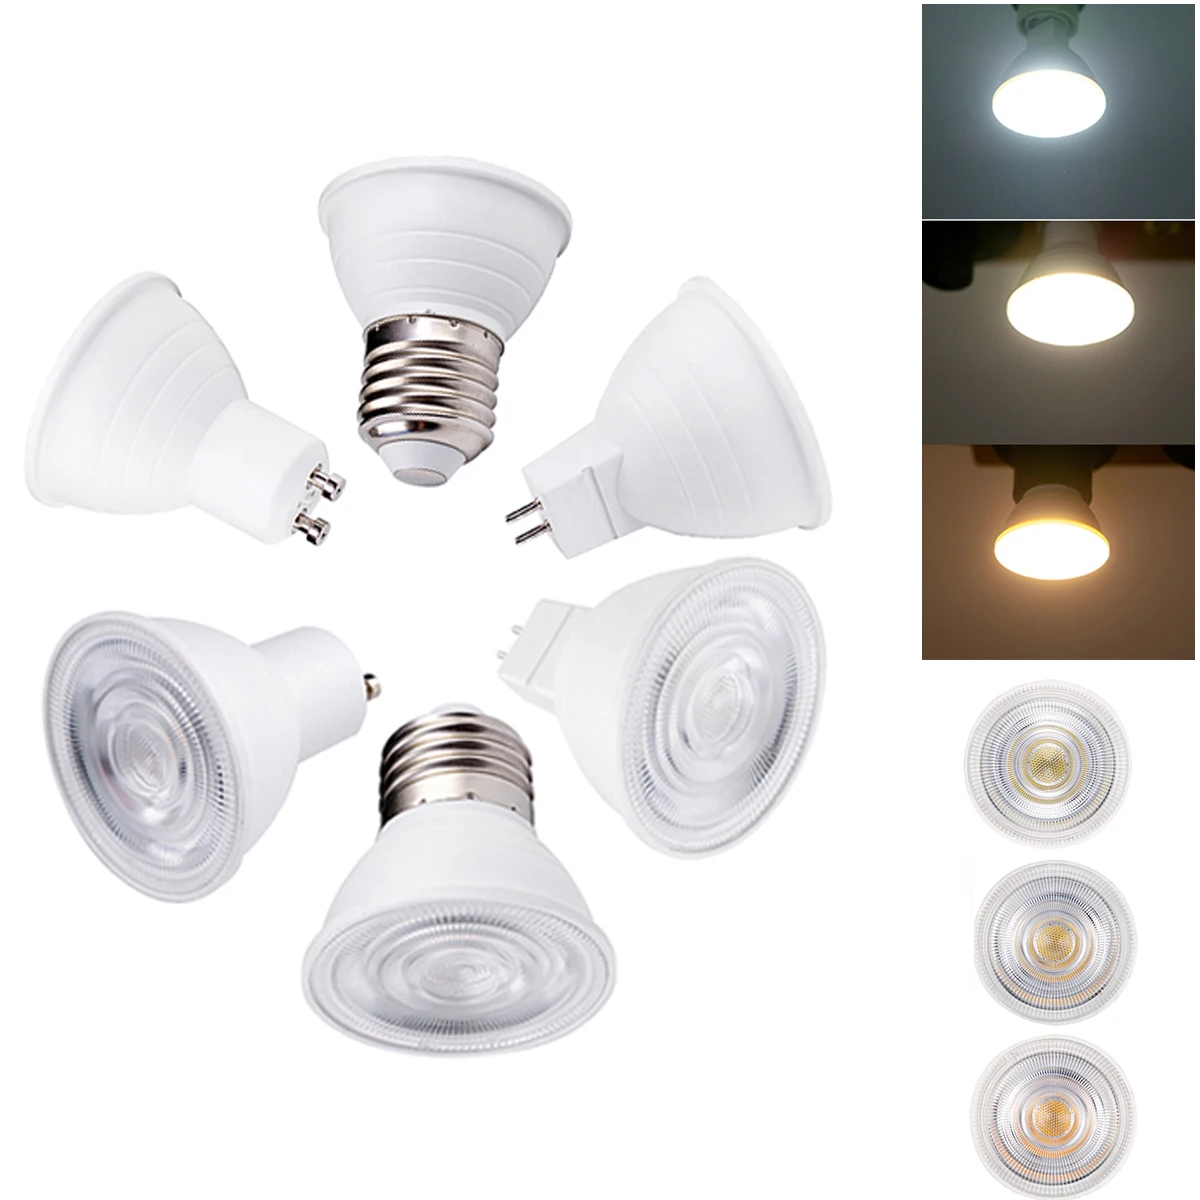 

GU10 MR16 LED Spotlight Bulbs COB 7W AC 110V 220V 3000K 4000K 6000K For Home Decoration Replace Halogen Lamp